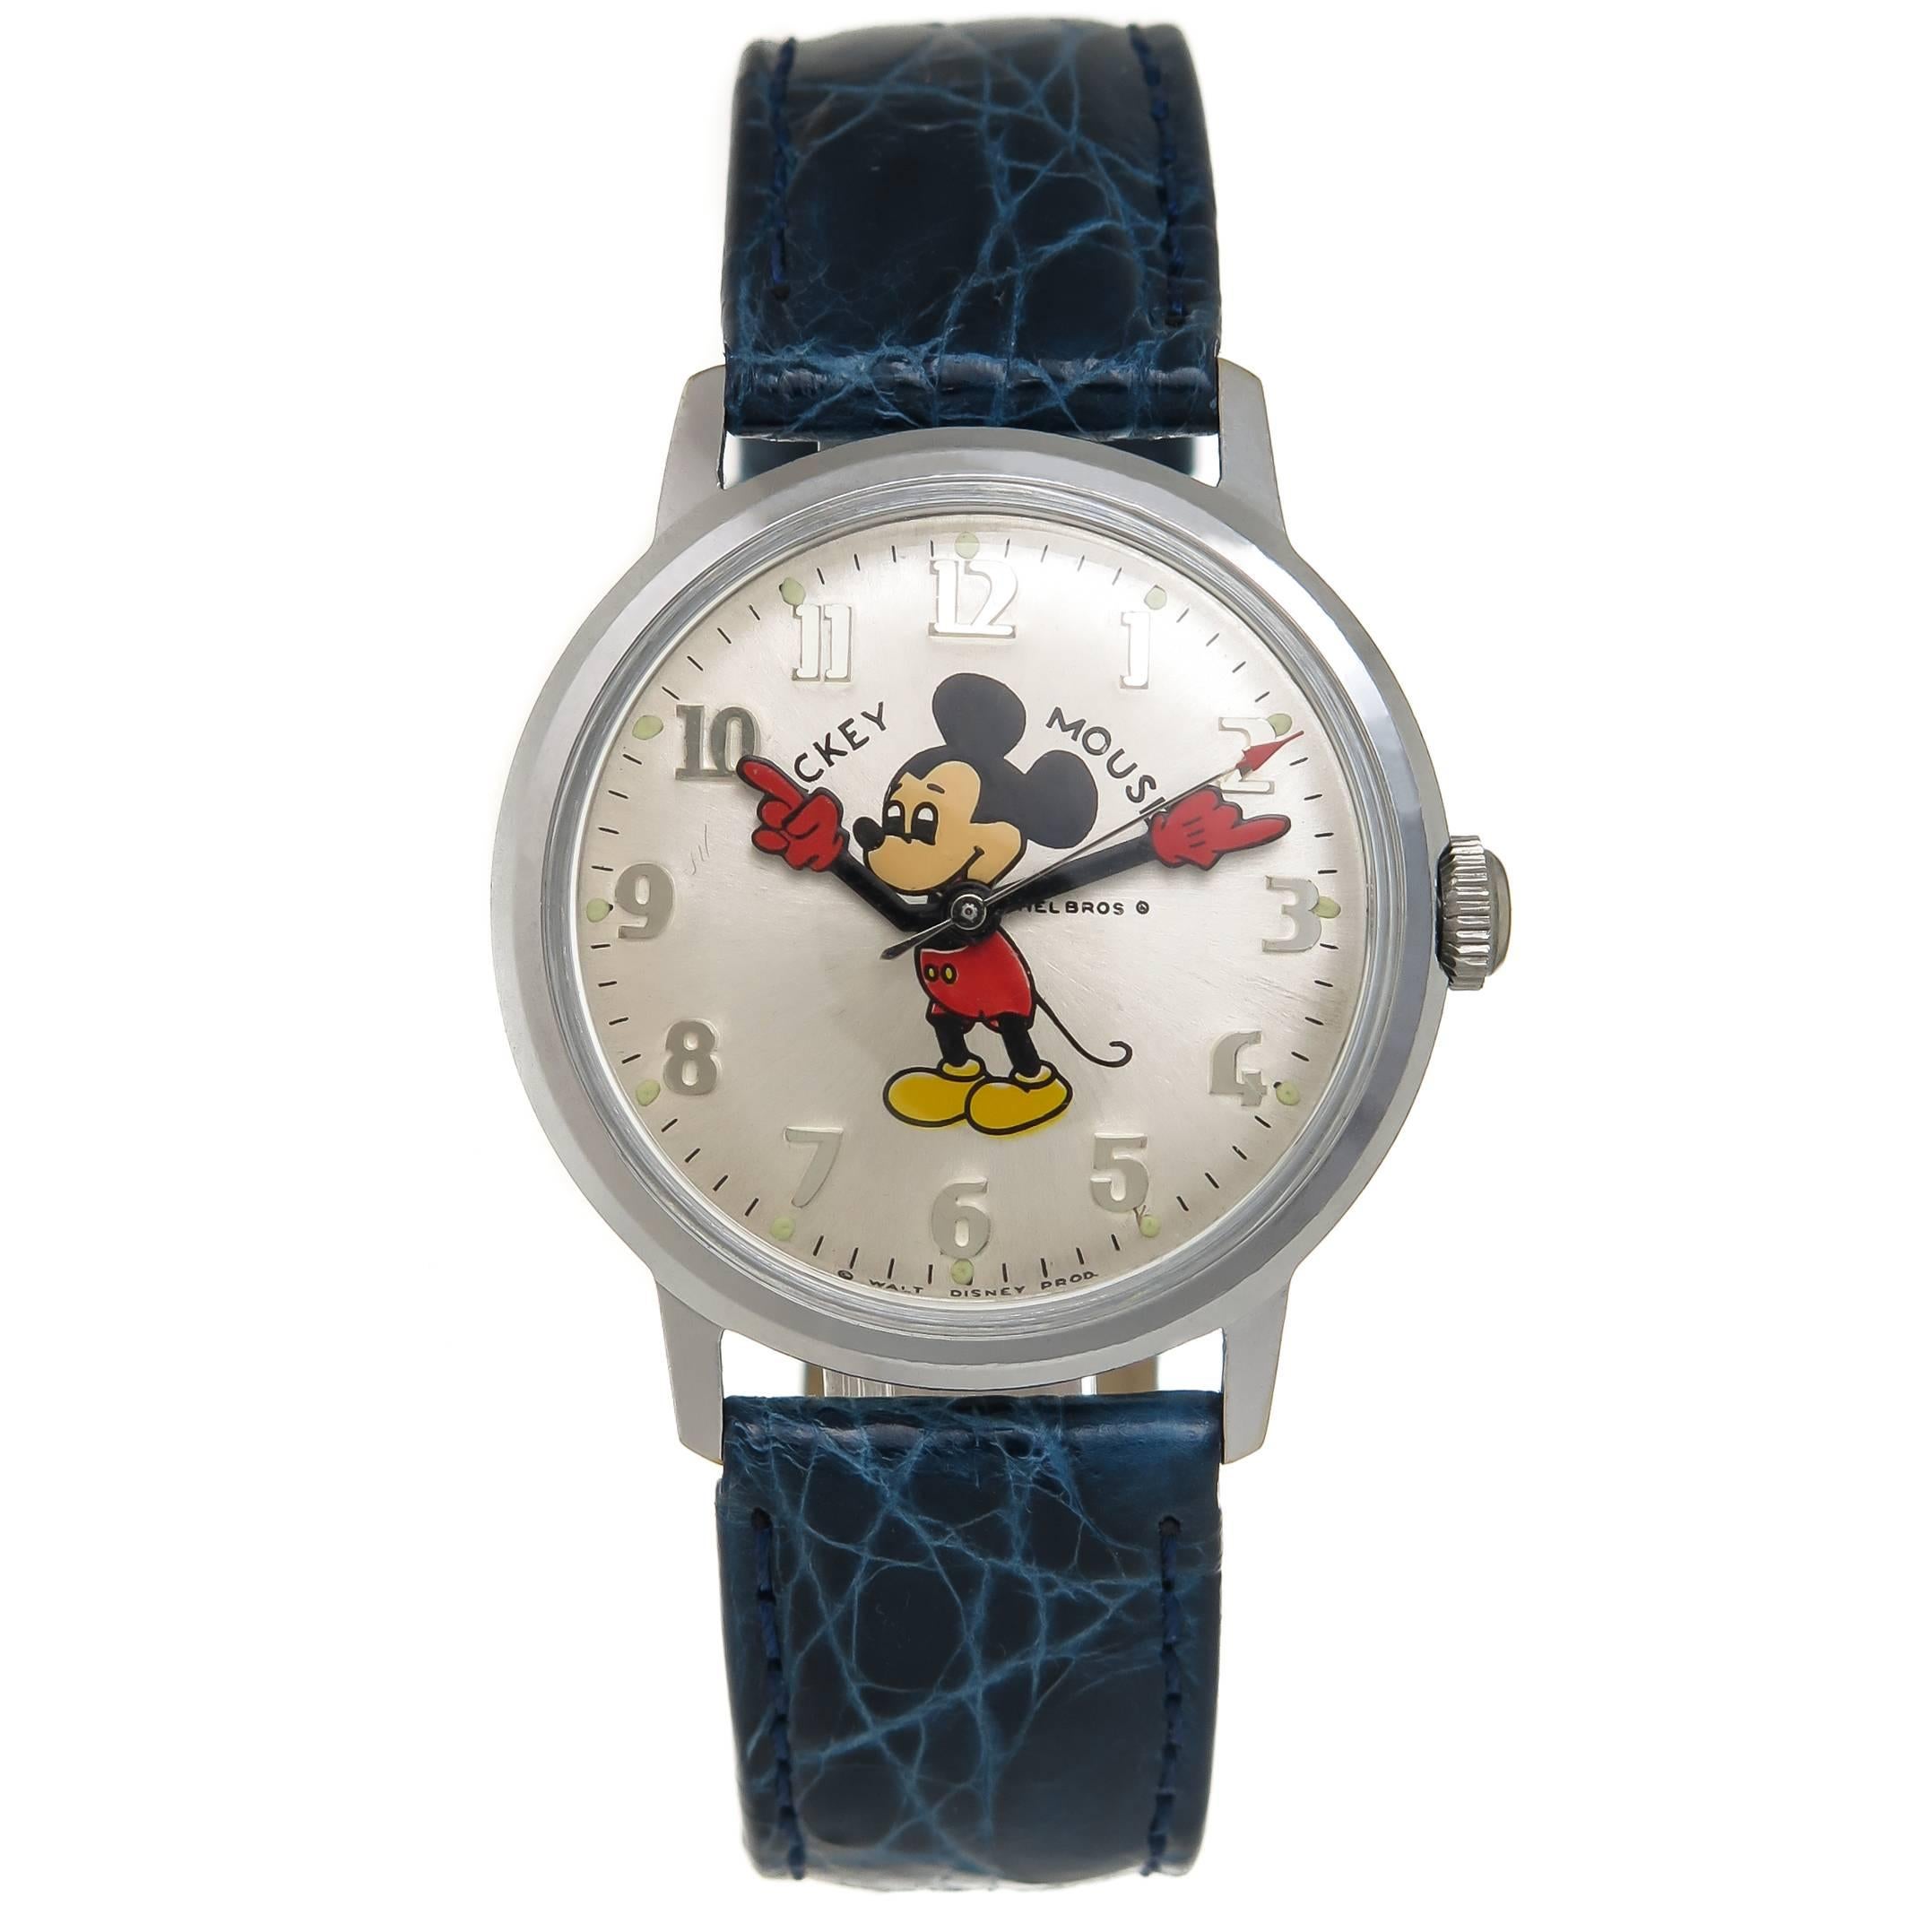 Helbros Stainless Steel Mickey Mouse Animated Mechanical Wristwatch, 1970s